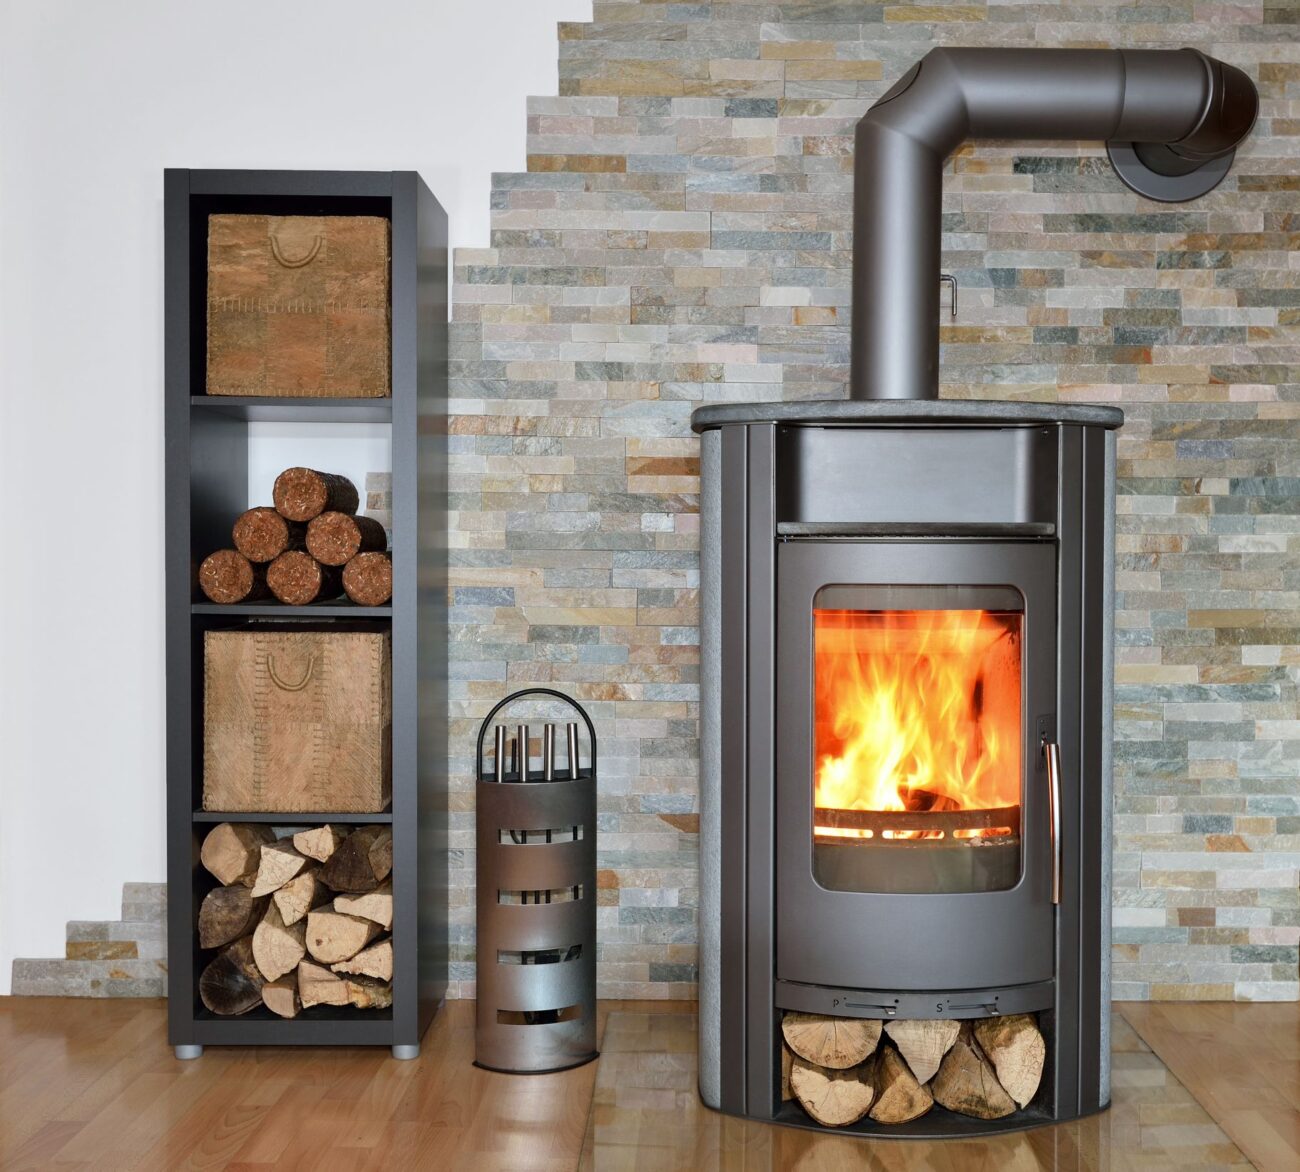 Compare Wood-Burning Stoves and Fireplaces